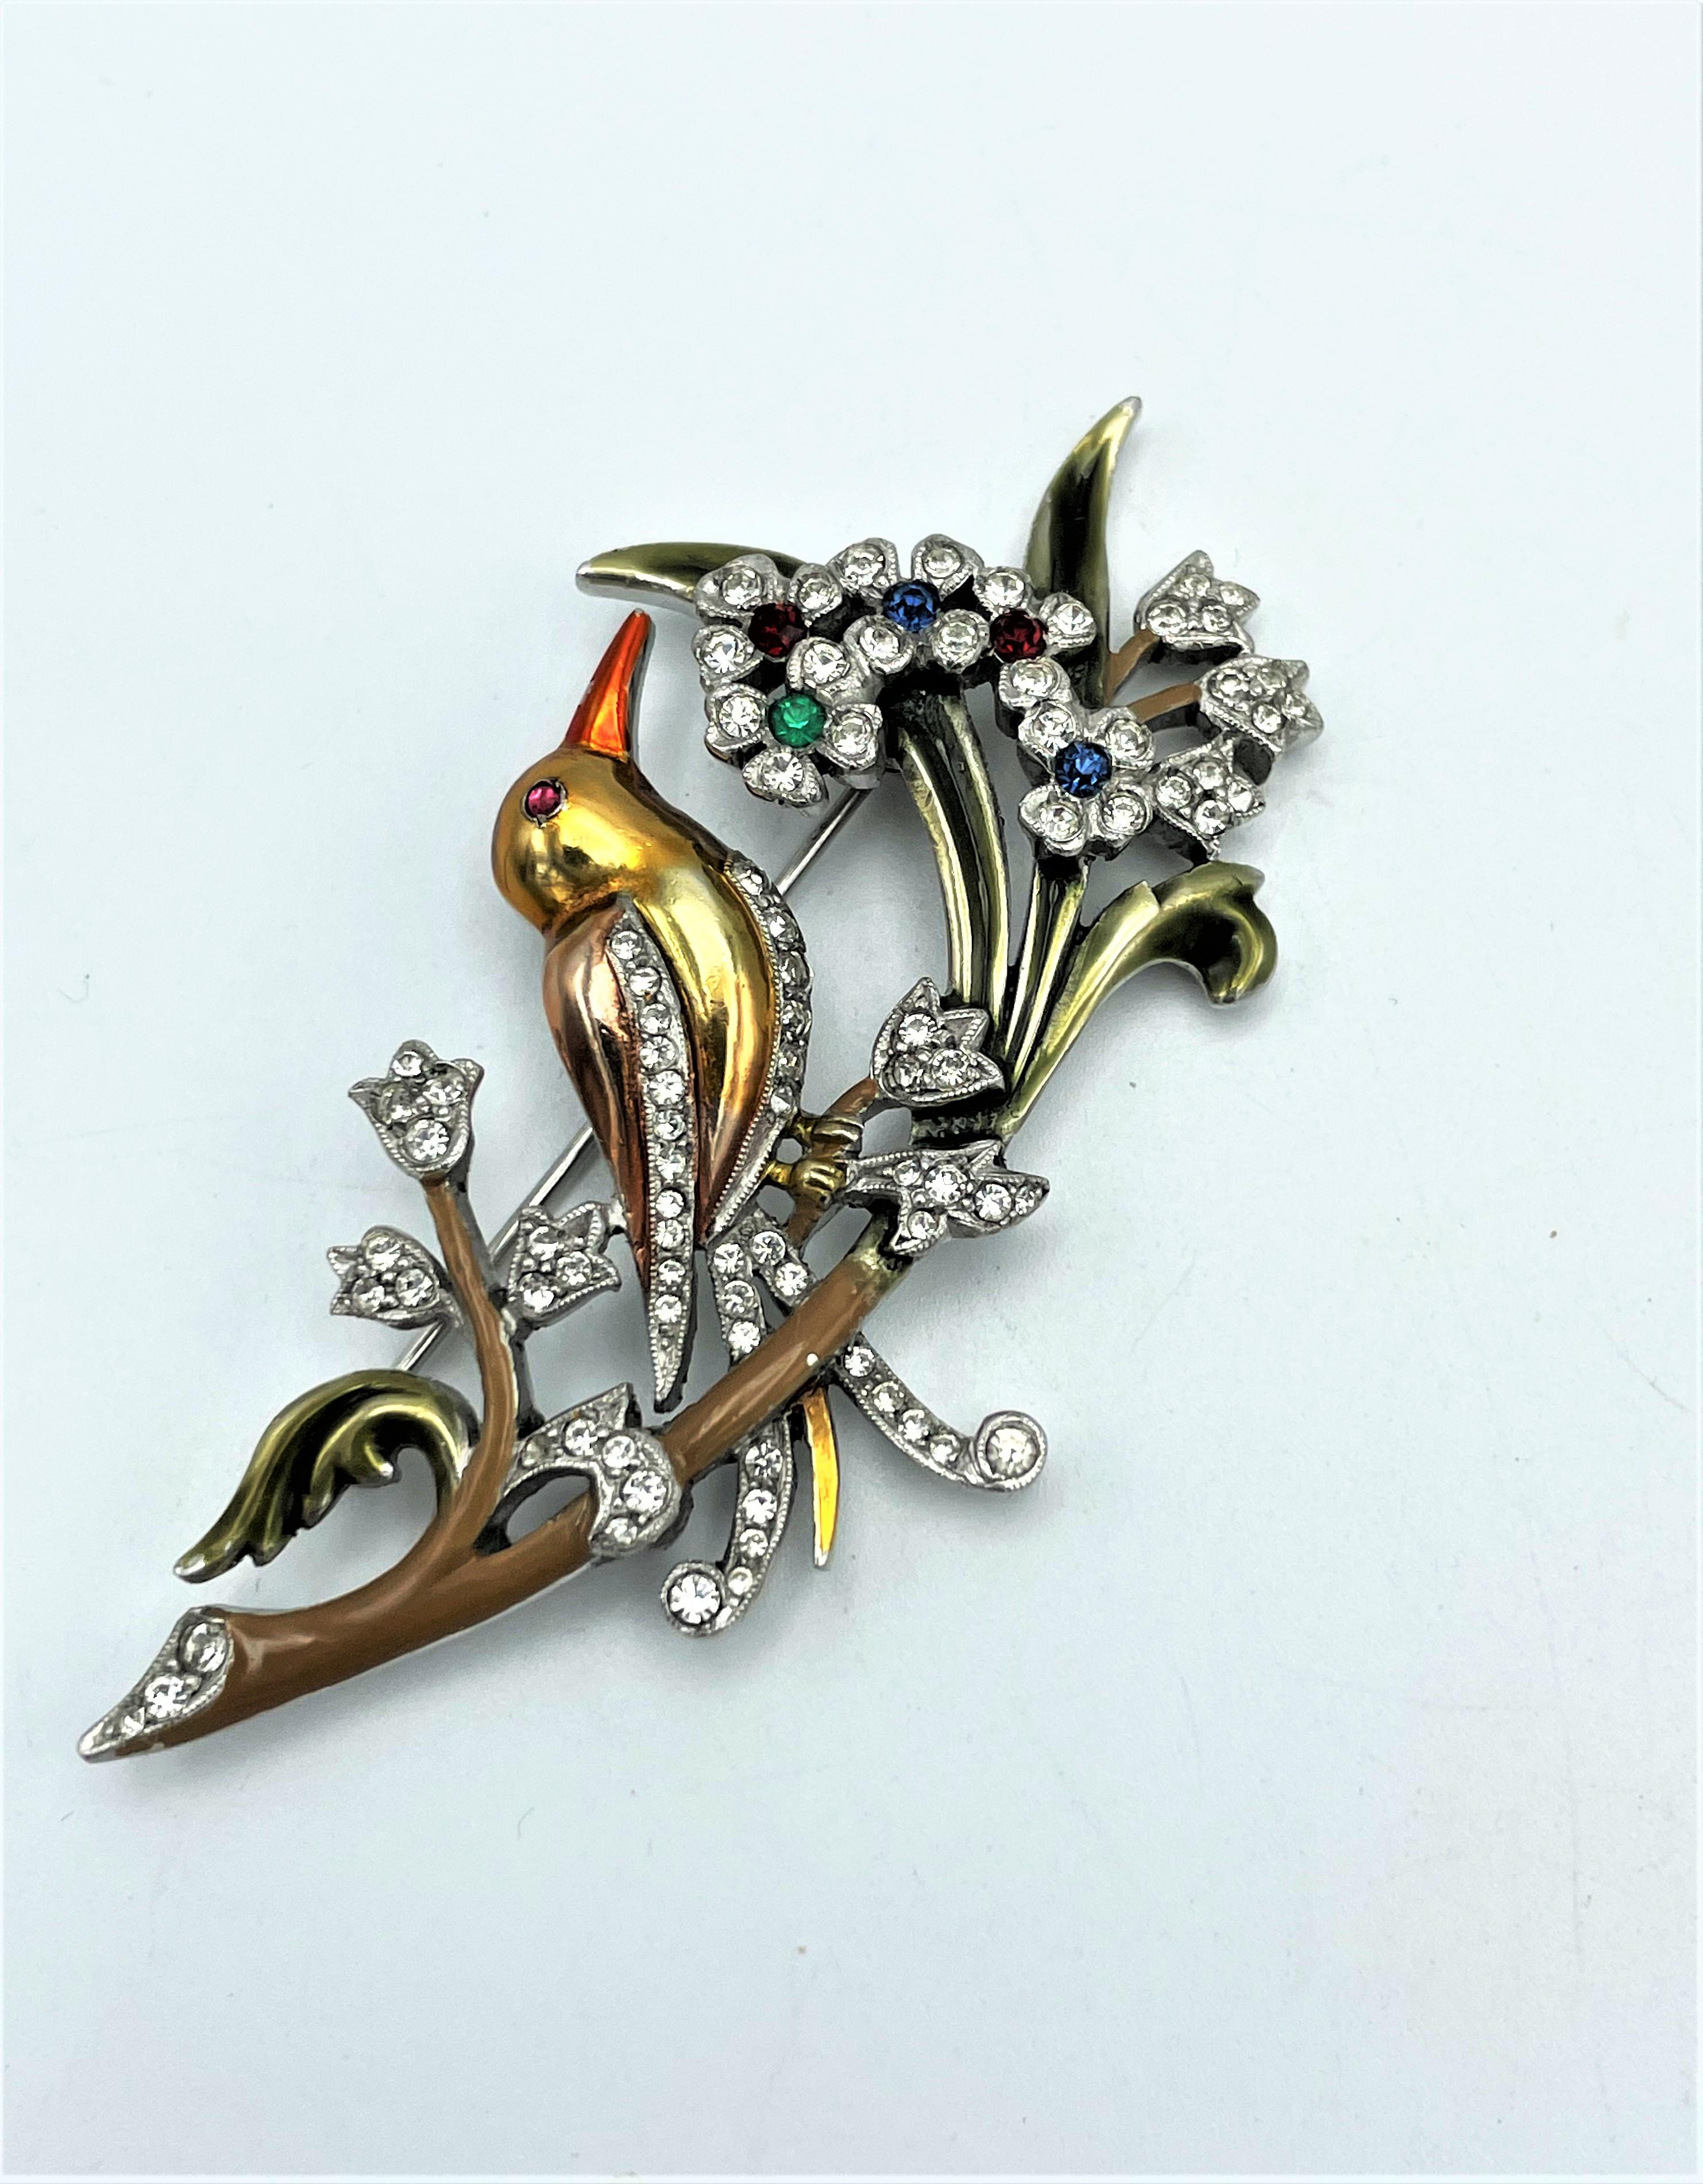 DUJAY unsigned metallic enamel brooch, bird on the branches, 1940s USA  1